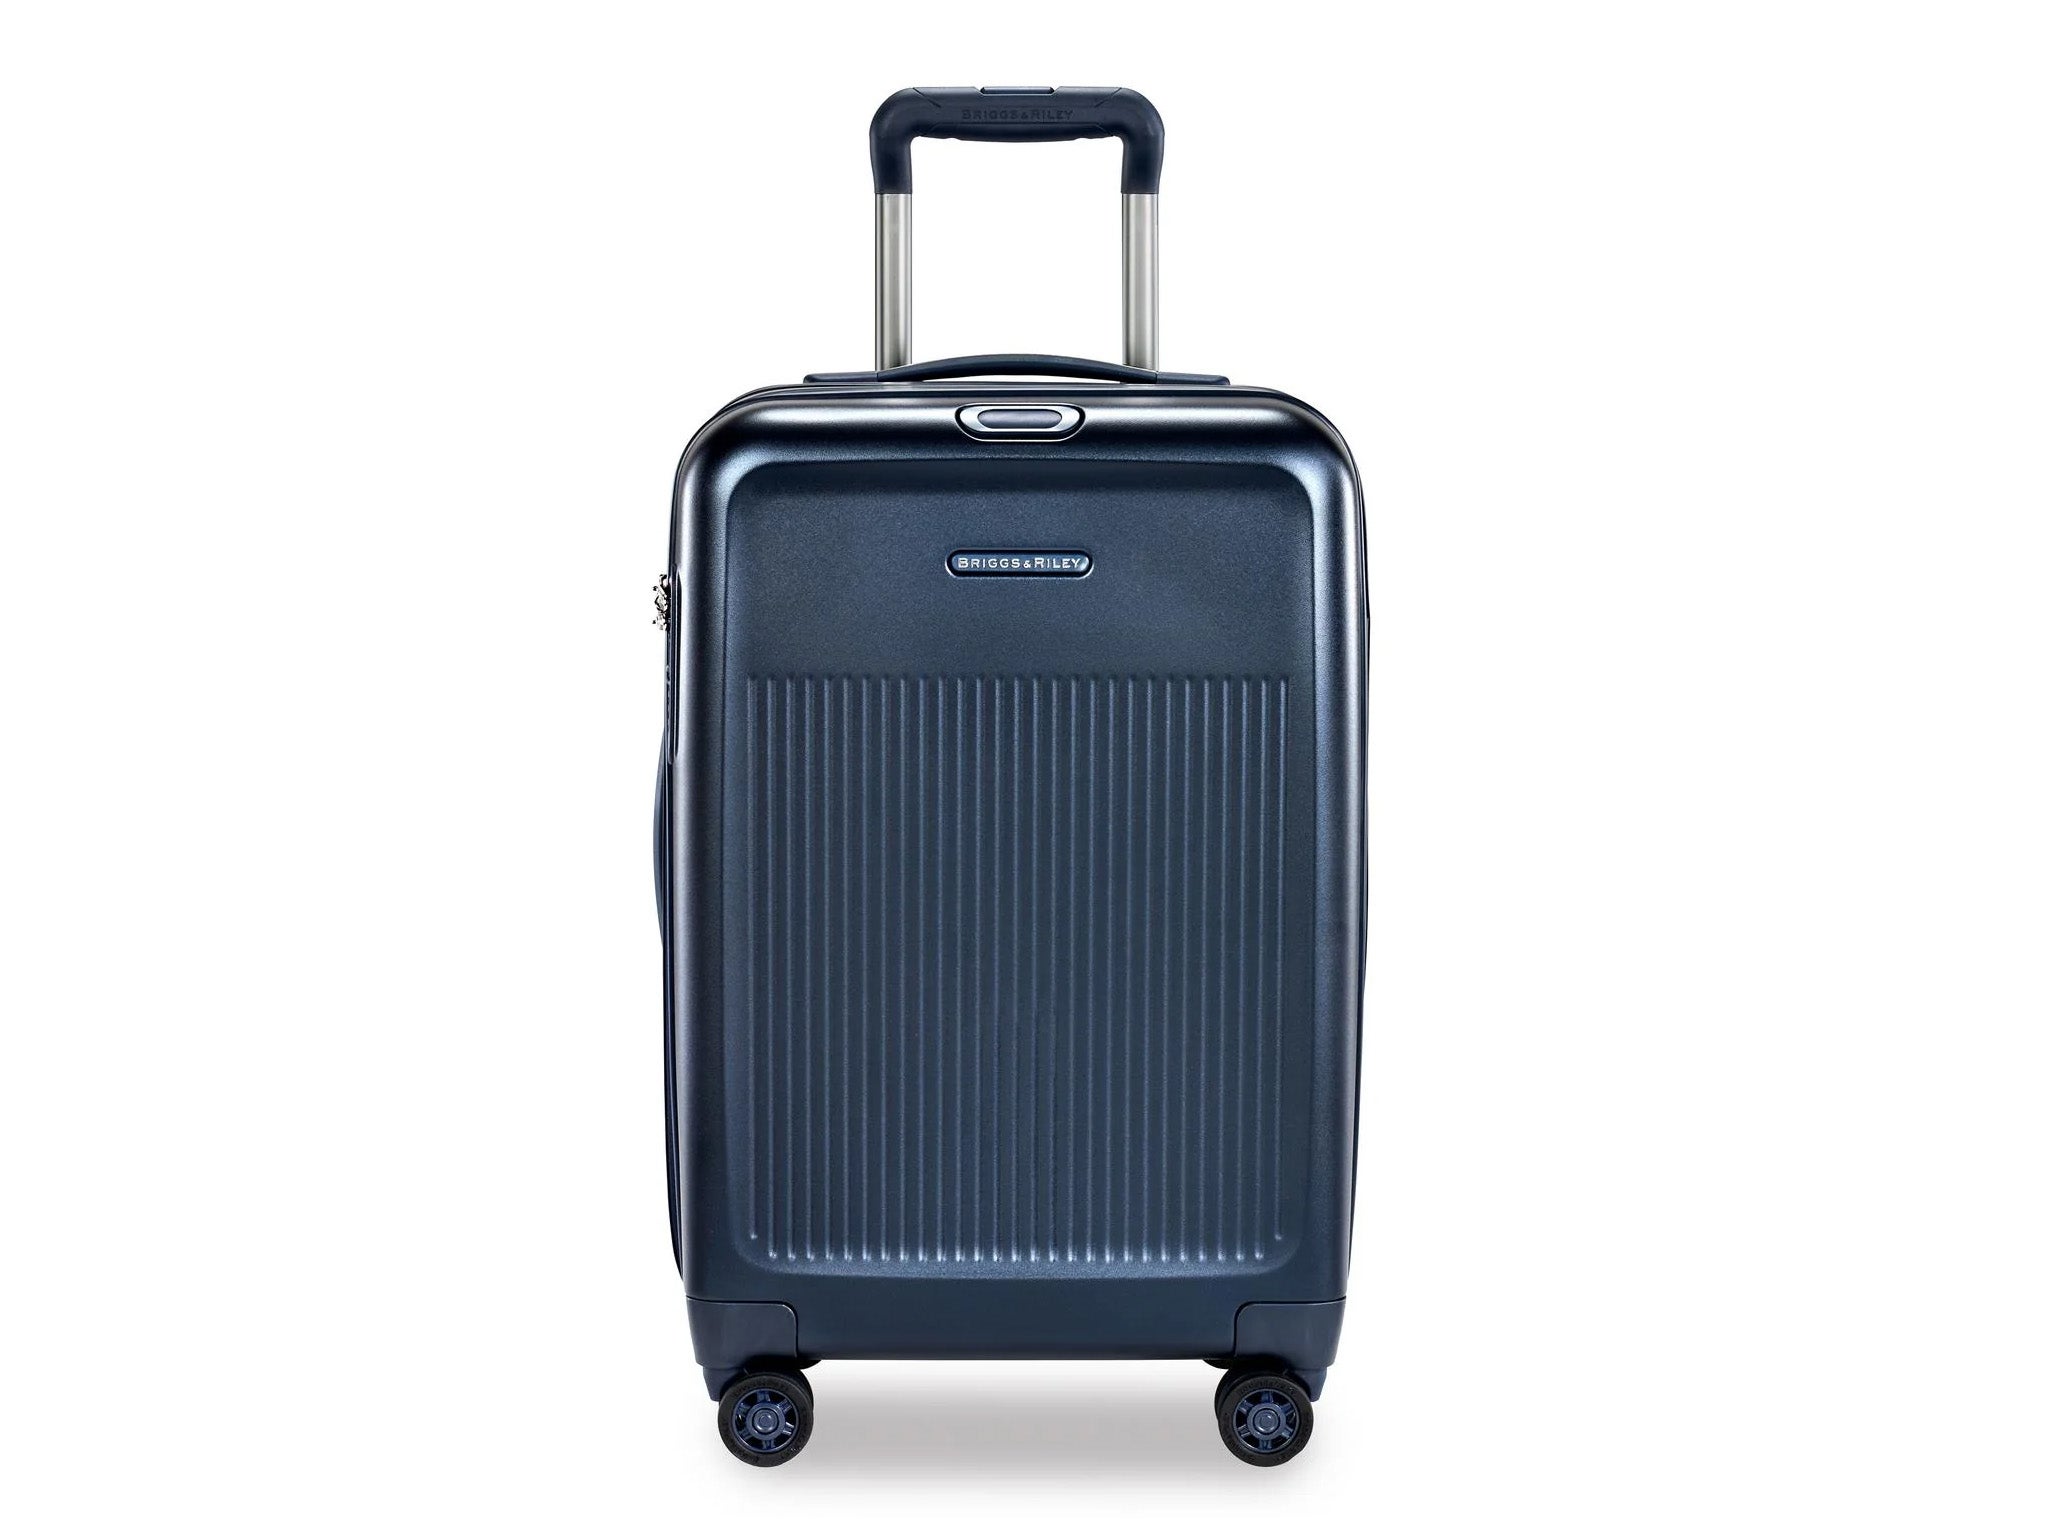 Briggs & Riley domestic carry-on expandable spinner